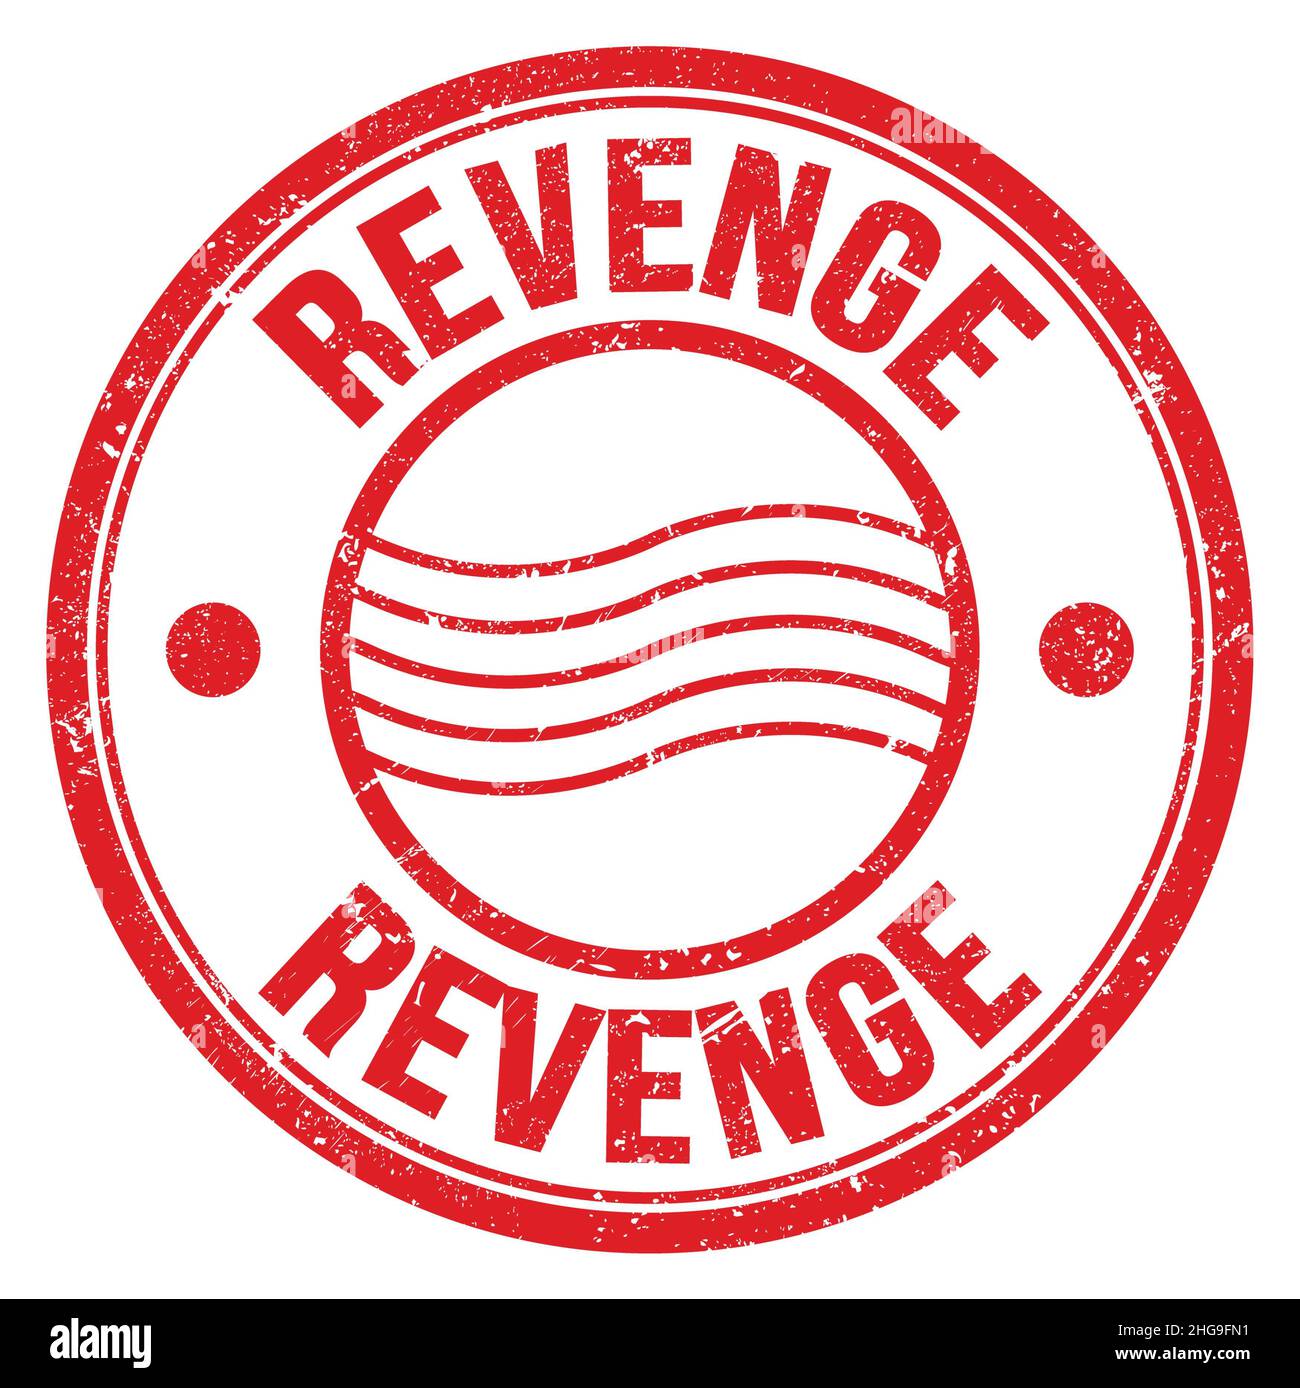 Avenge word Cut Out Stock Images & Pictures - Alamy